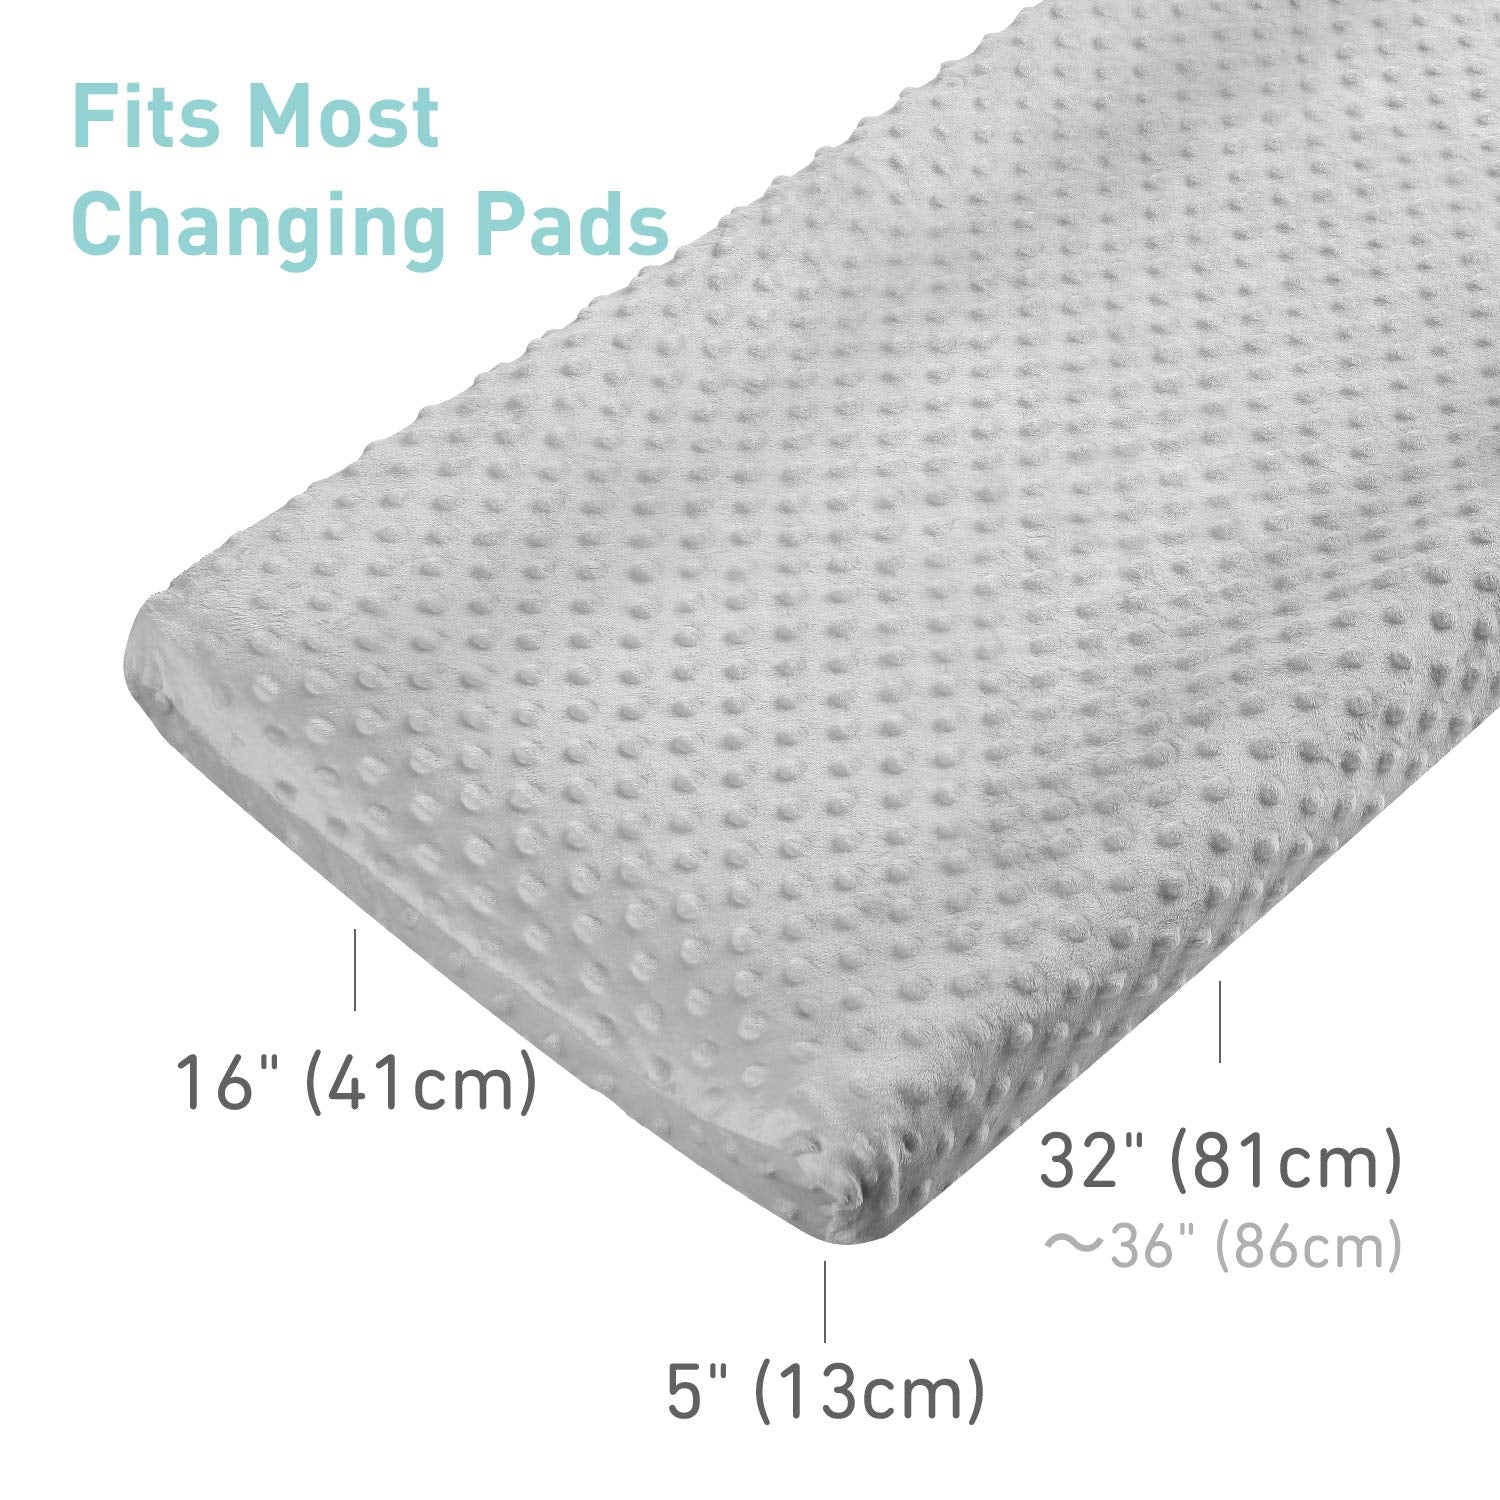 Babebay Changing Pad Covers for Baby Girls - Light Grey & Pink